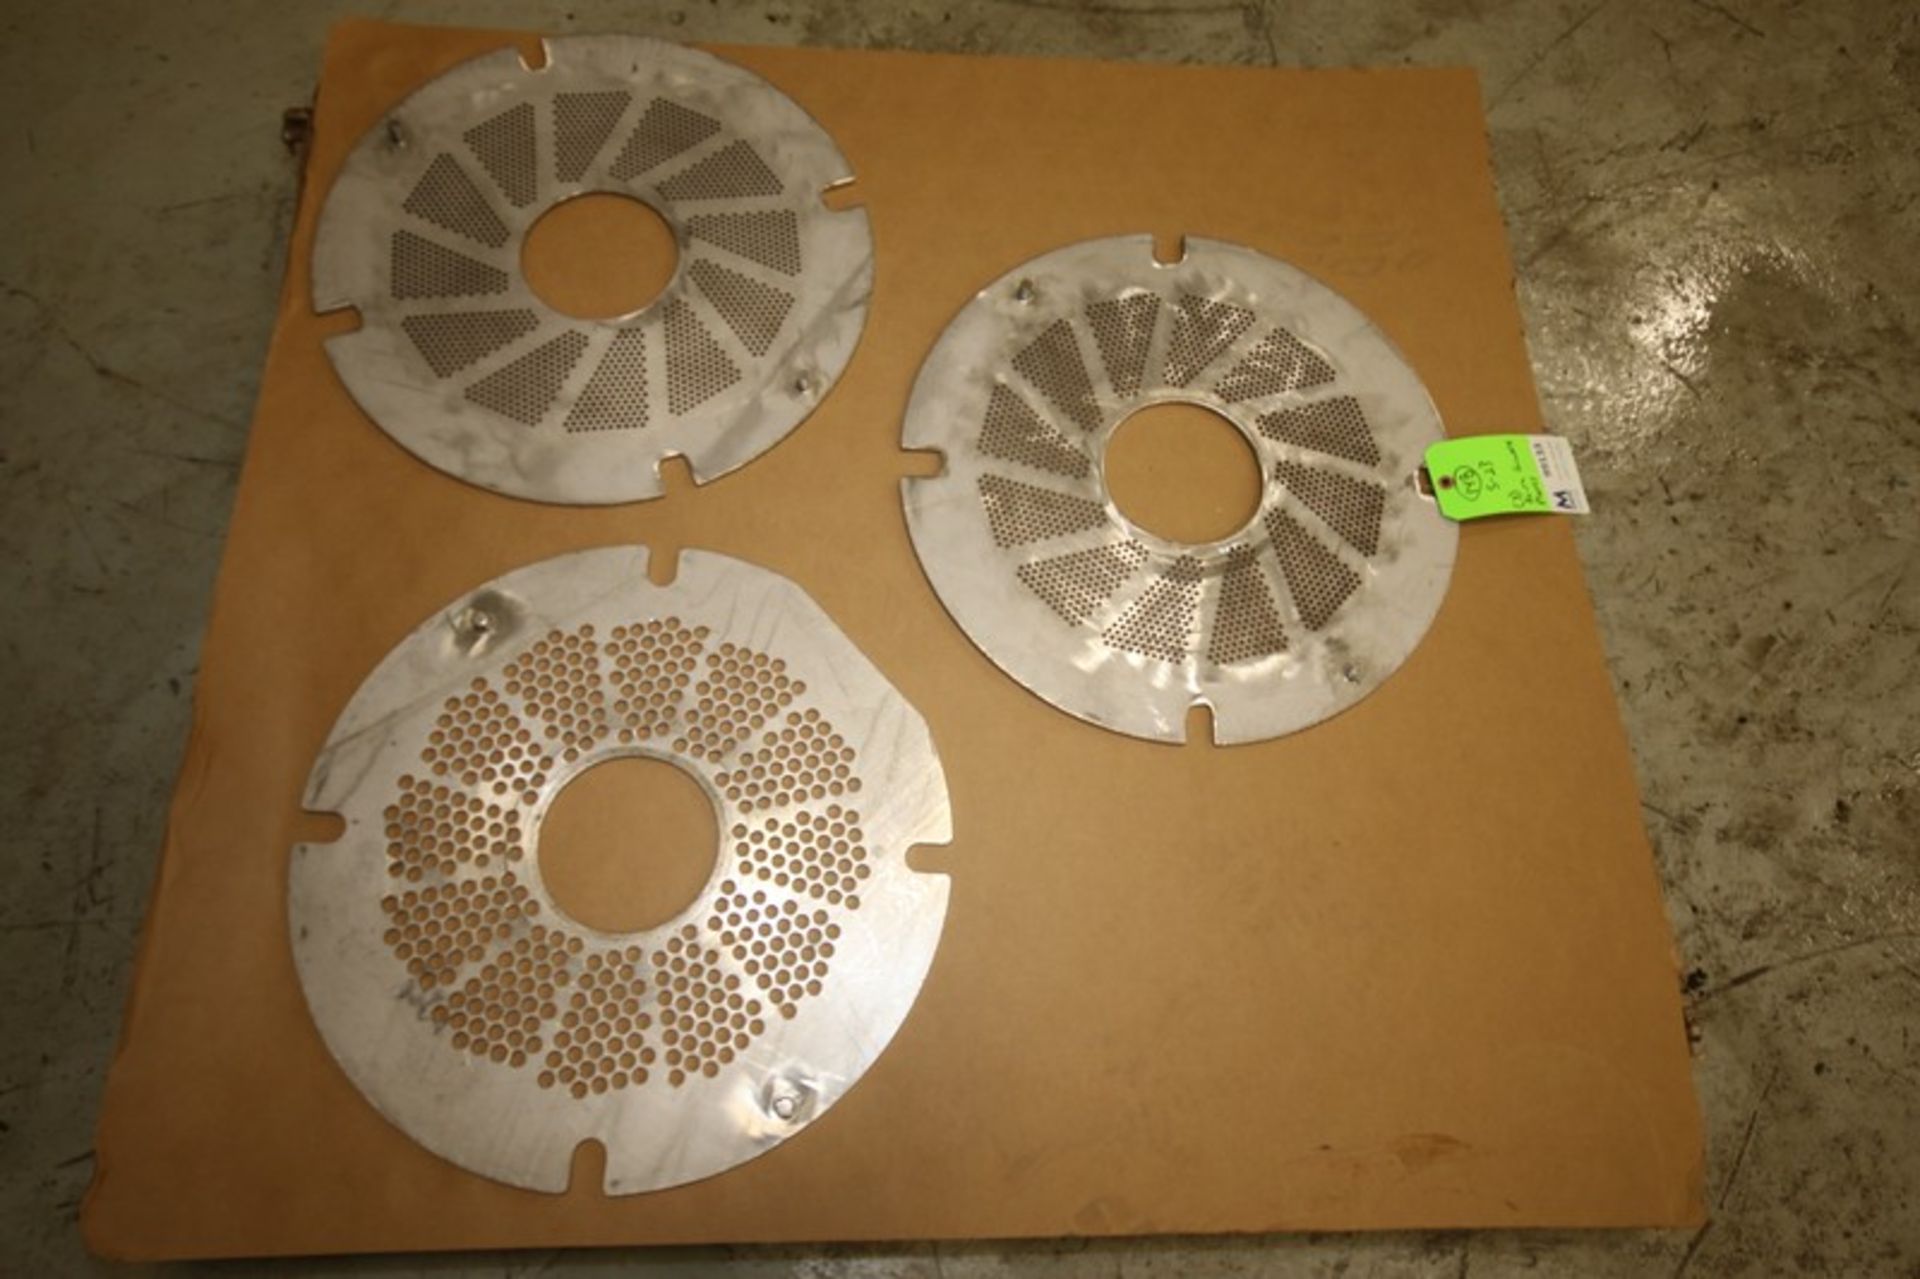 Lot of (3) Reitz 20" Grinder Plates (INV#99133) (Located @ the MDG Auction Showroom in Pgh., PA)( - Image 2 of 2